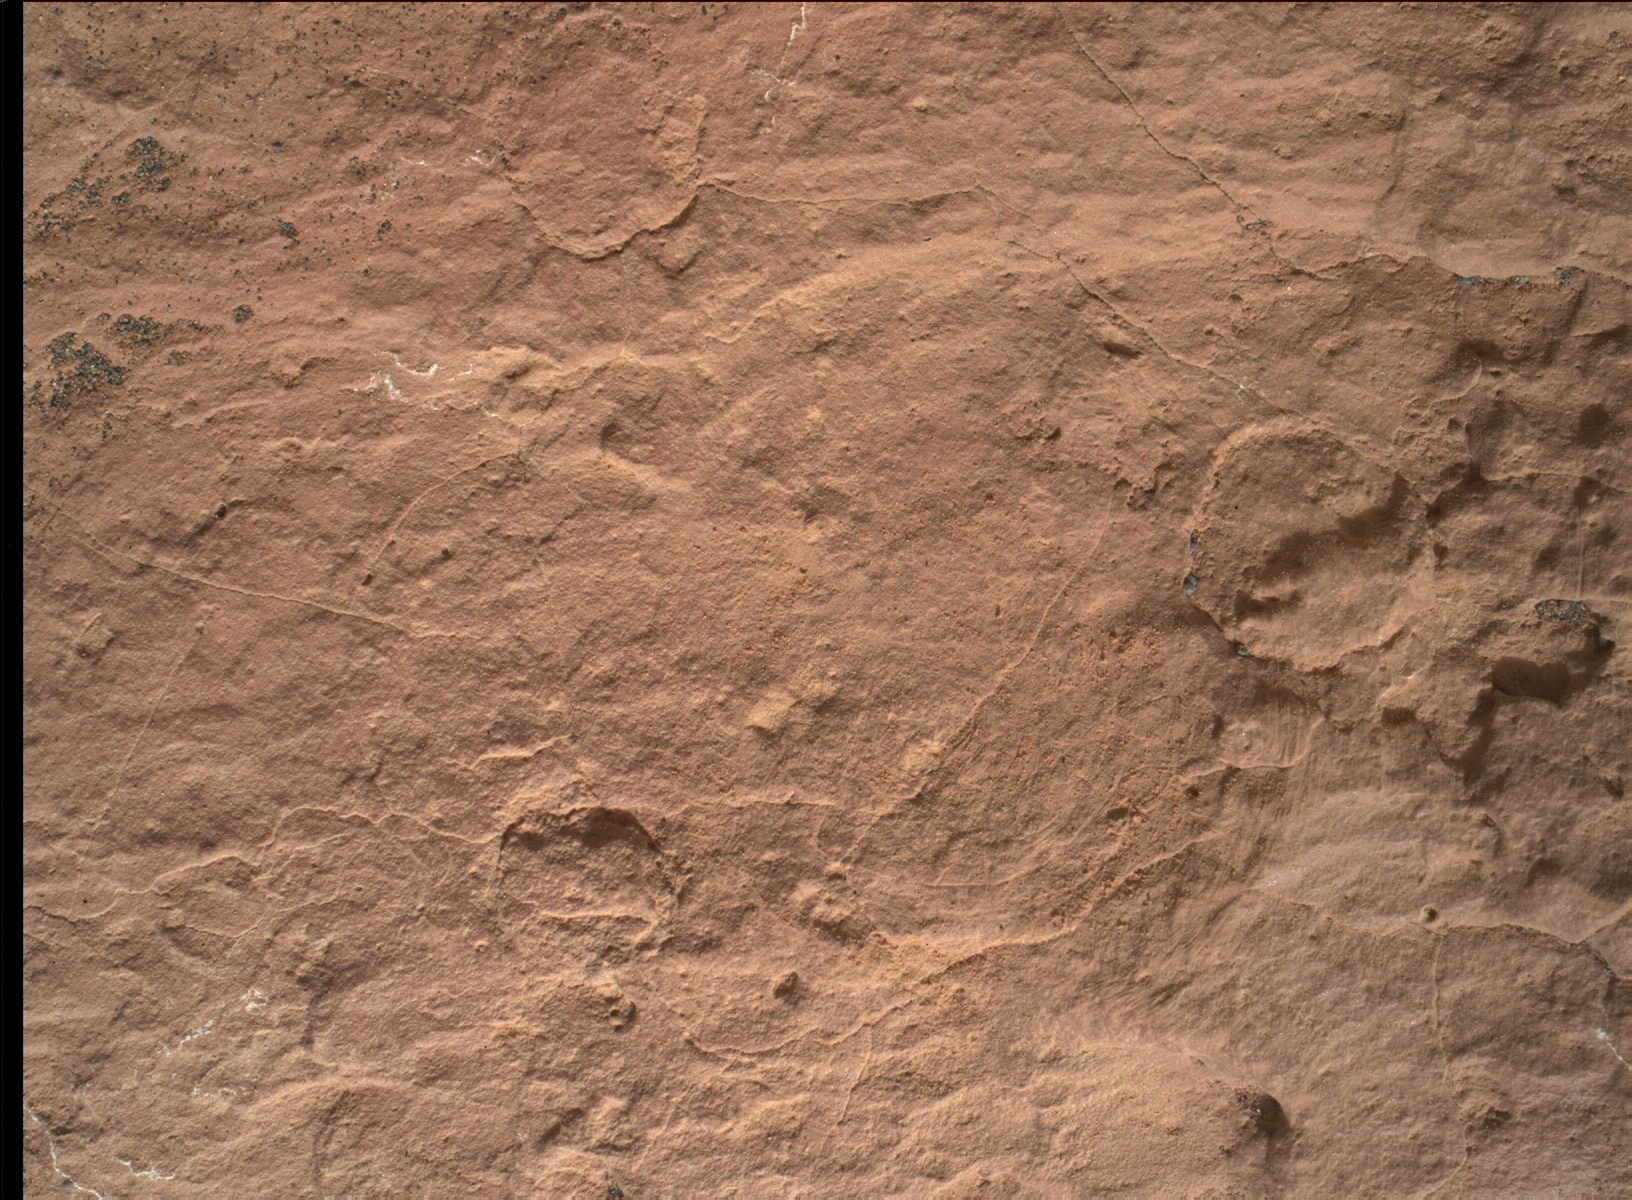 Nasa's Mars rover Curiosity acquired this image using its Mars Hand Lens Imager (MAHLI) on Sol 1586